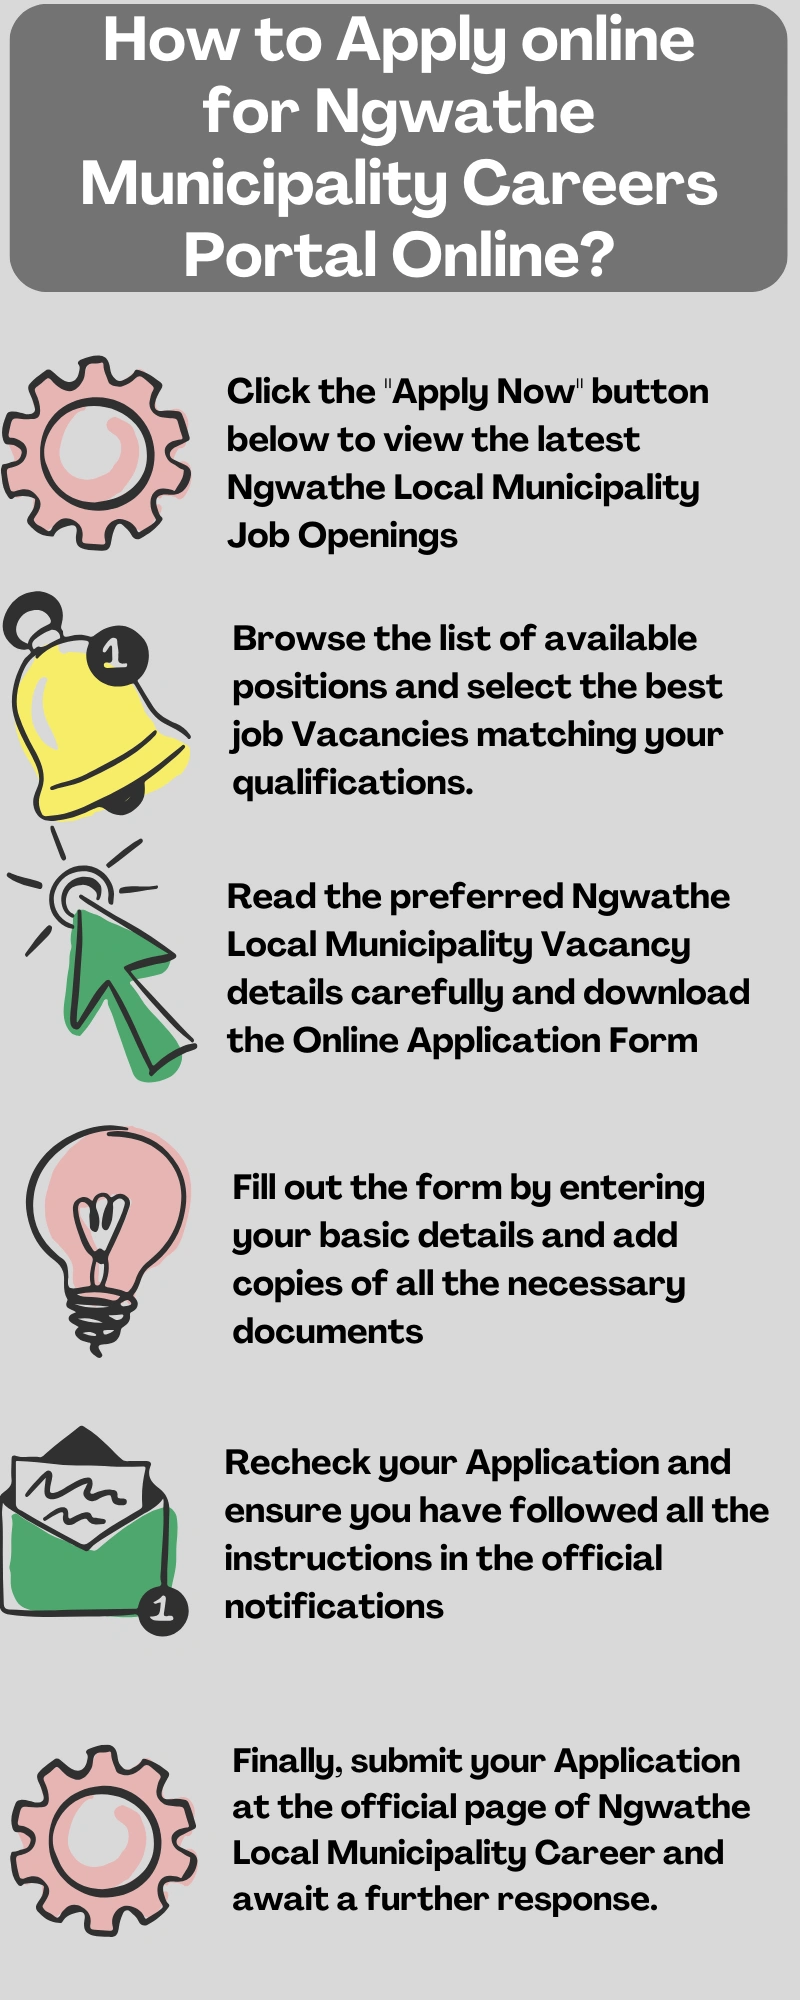 How to Apply online for Ngwathe Municipality Careers Portal Online?